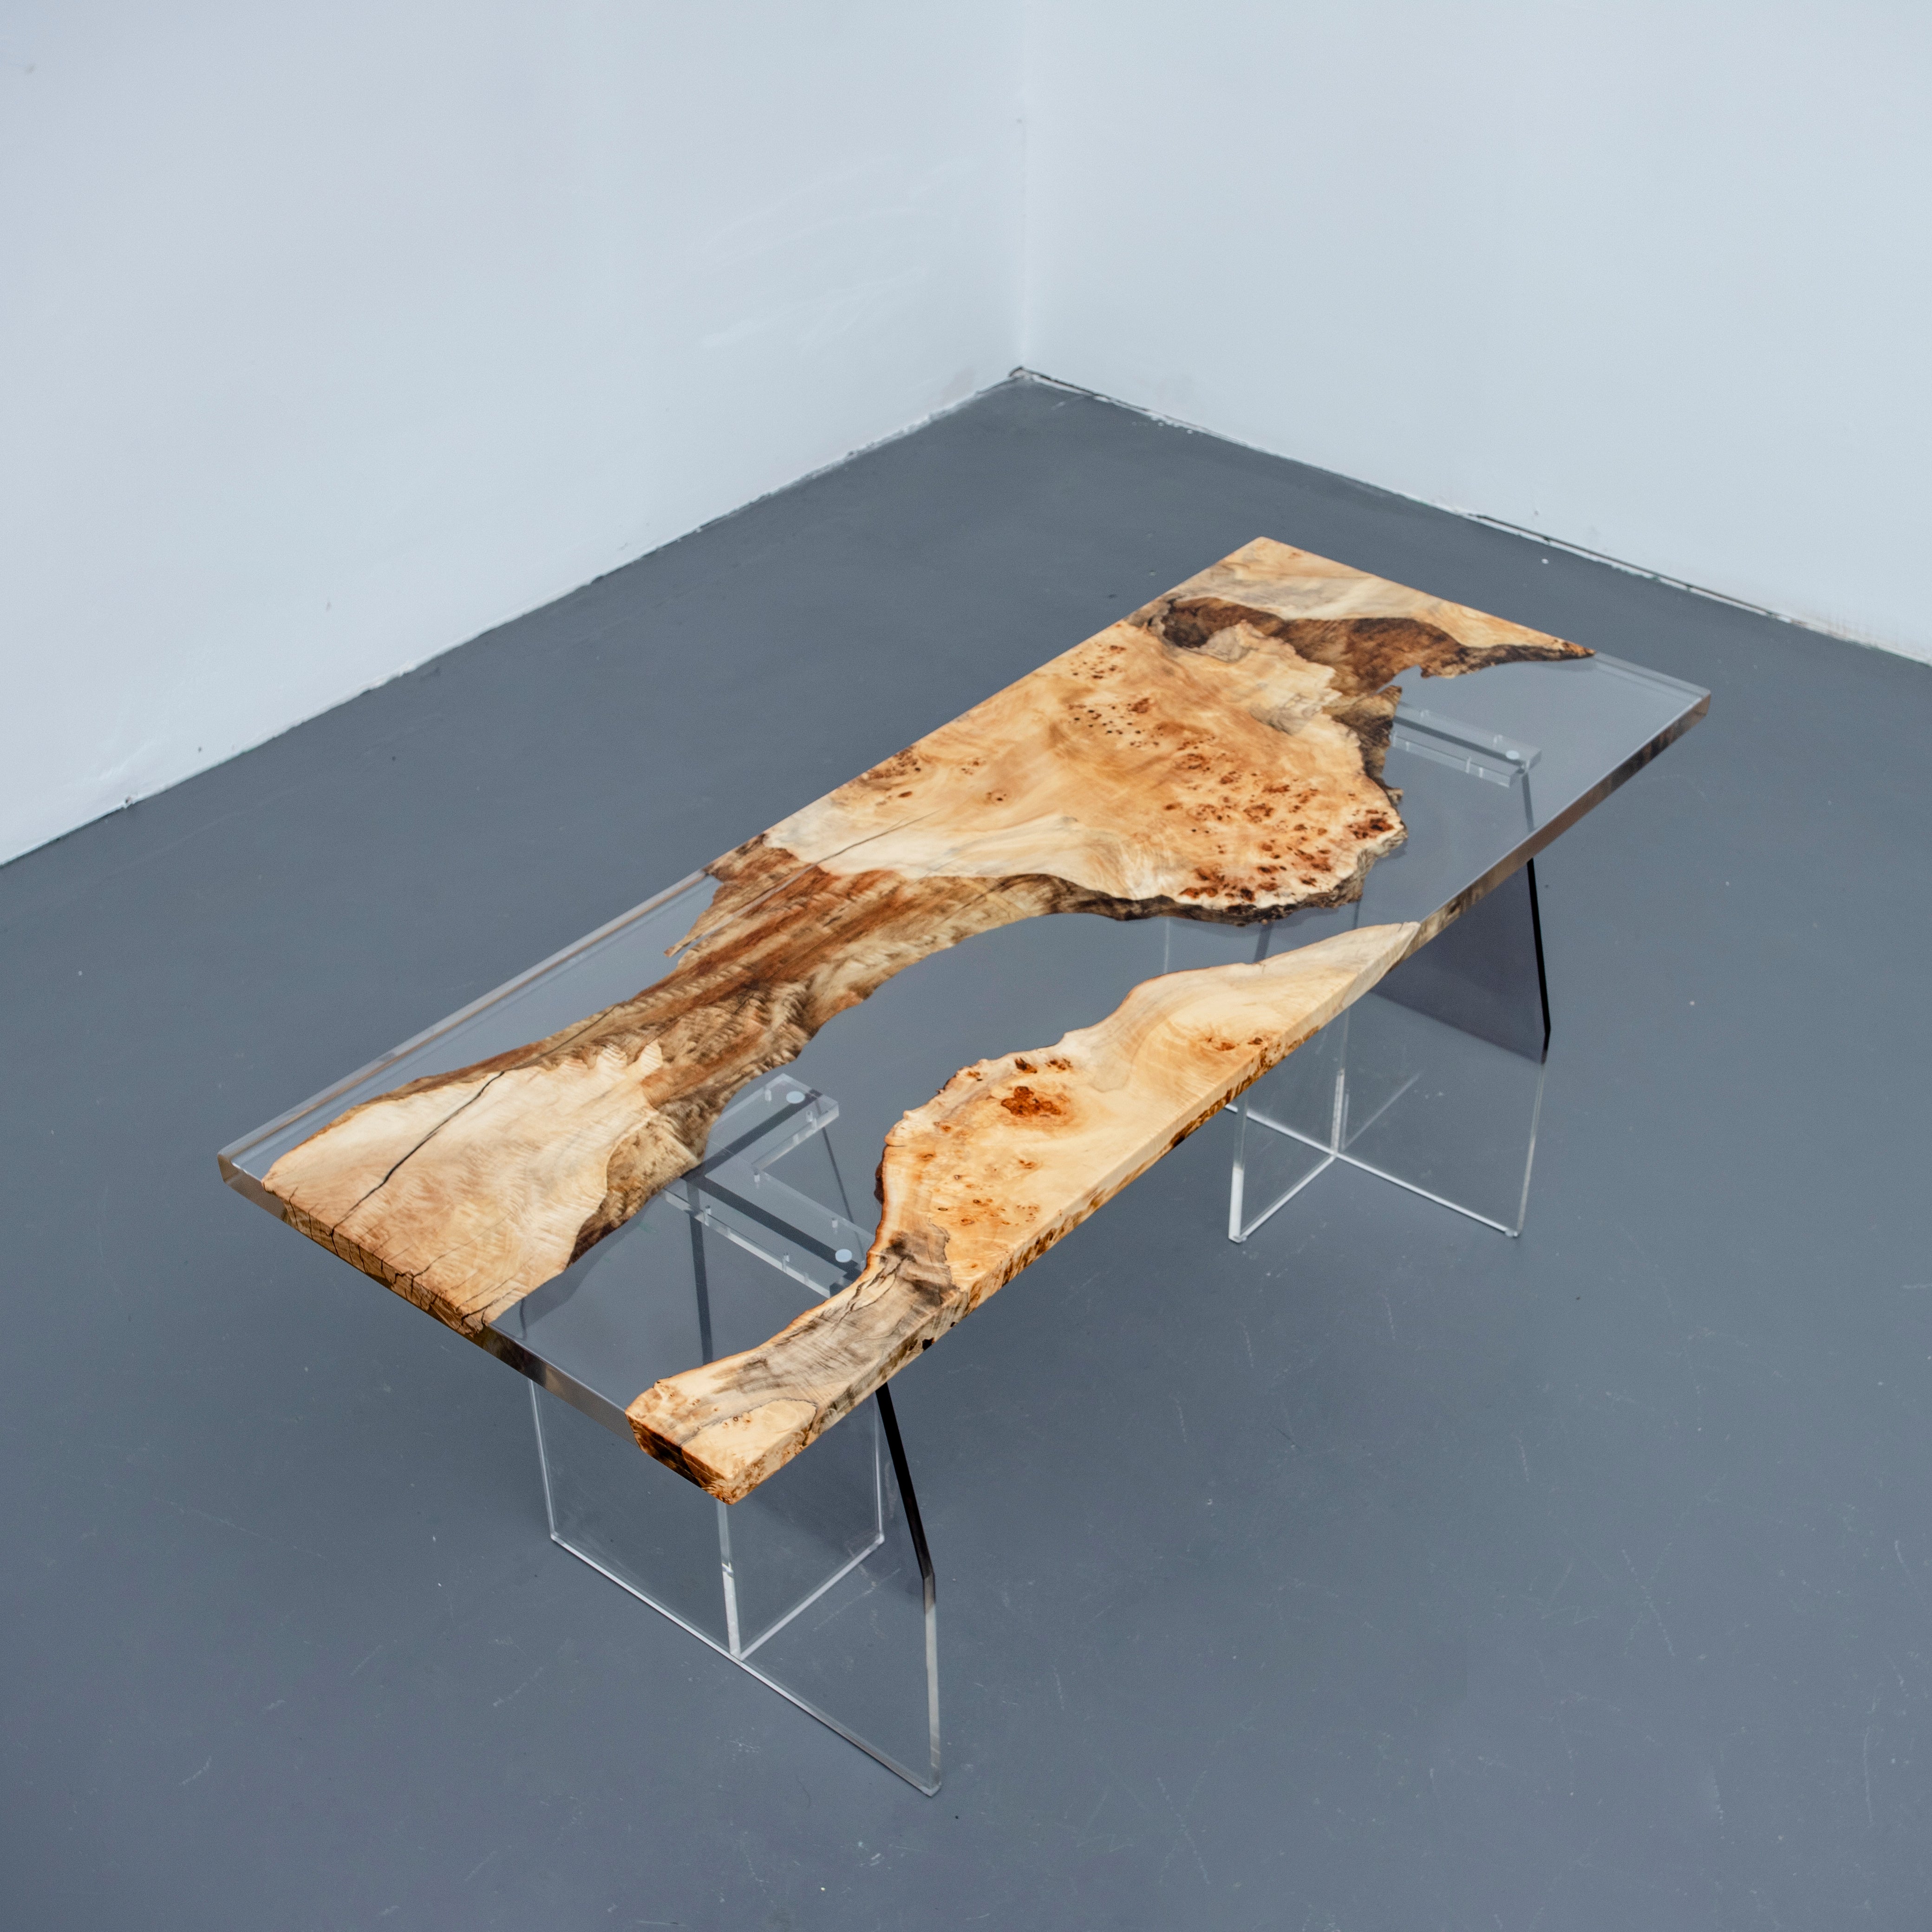 Kloer Epoxy Resin Table Top, Resin Epoxy Table, Epoxy Resin Fir Table Tops